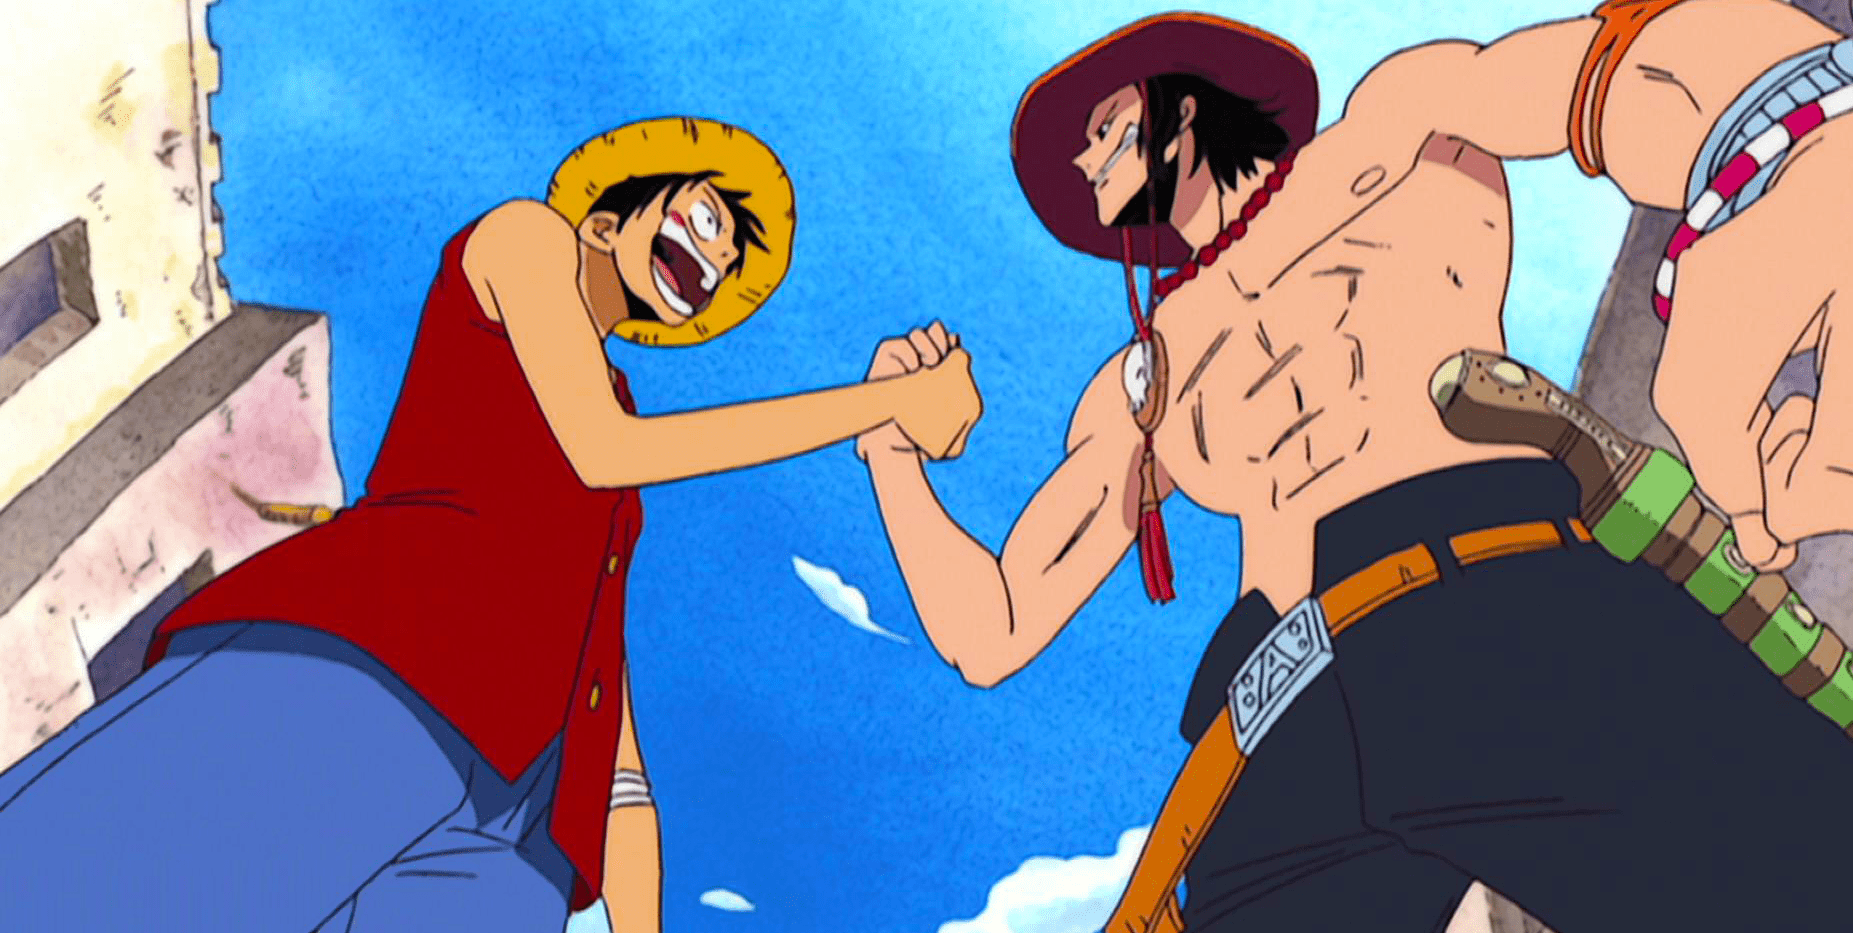 Luffy and Ace